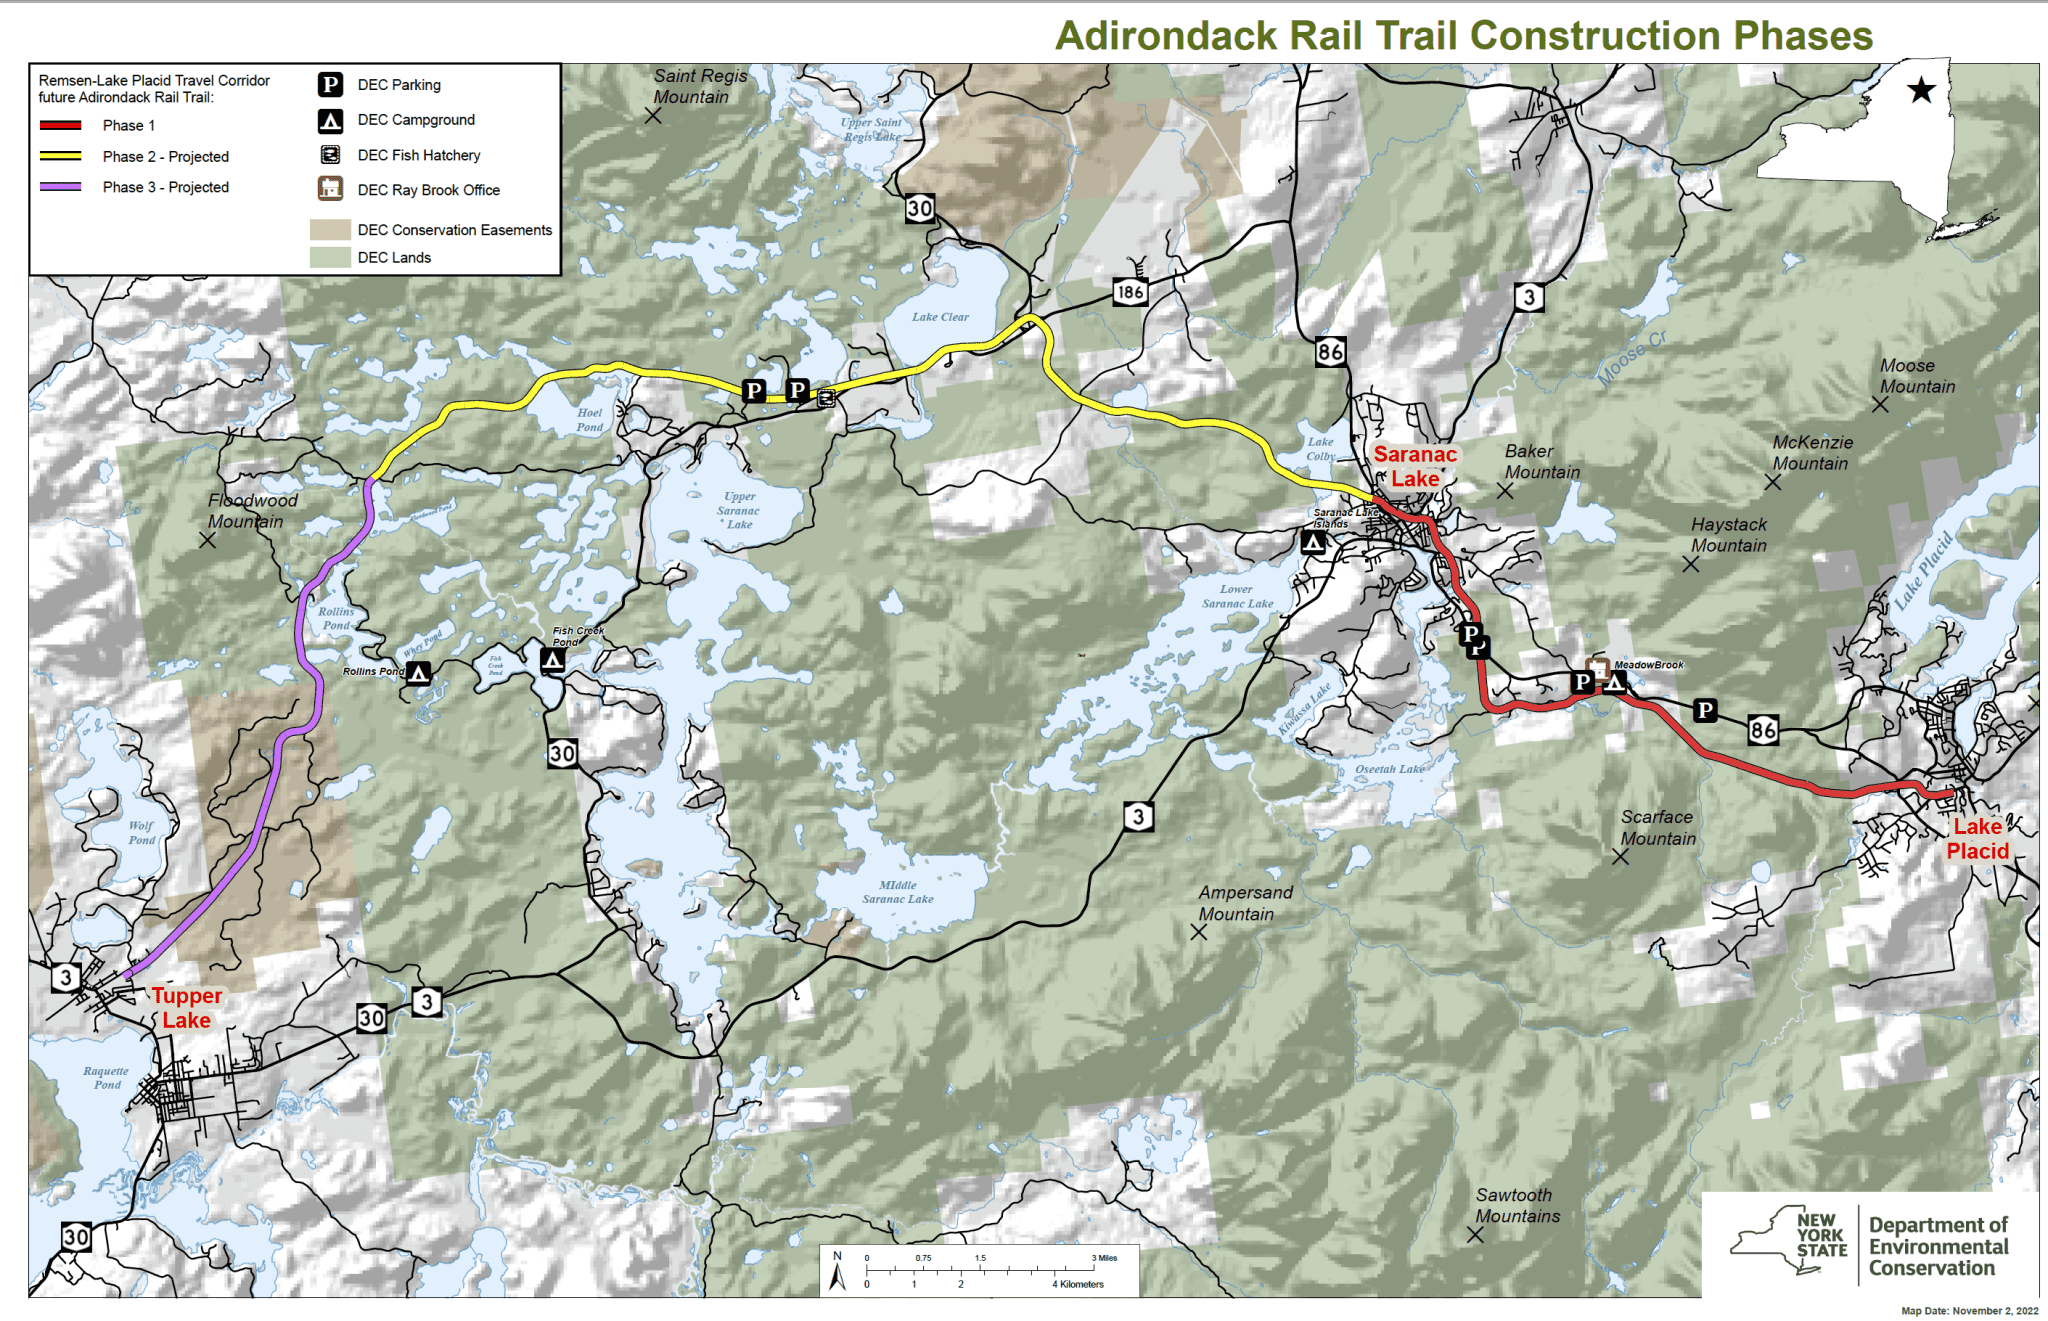 A map of the Adirondack Rail Trail and construction phases. Map courtesy of DEC